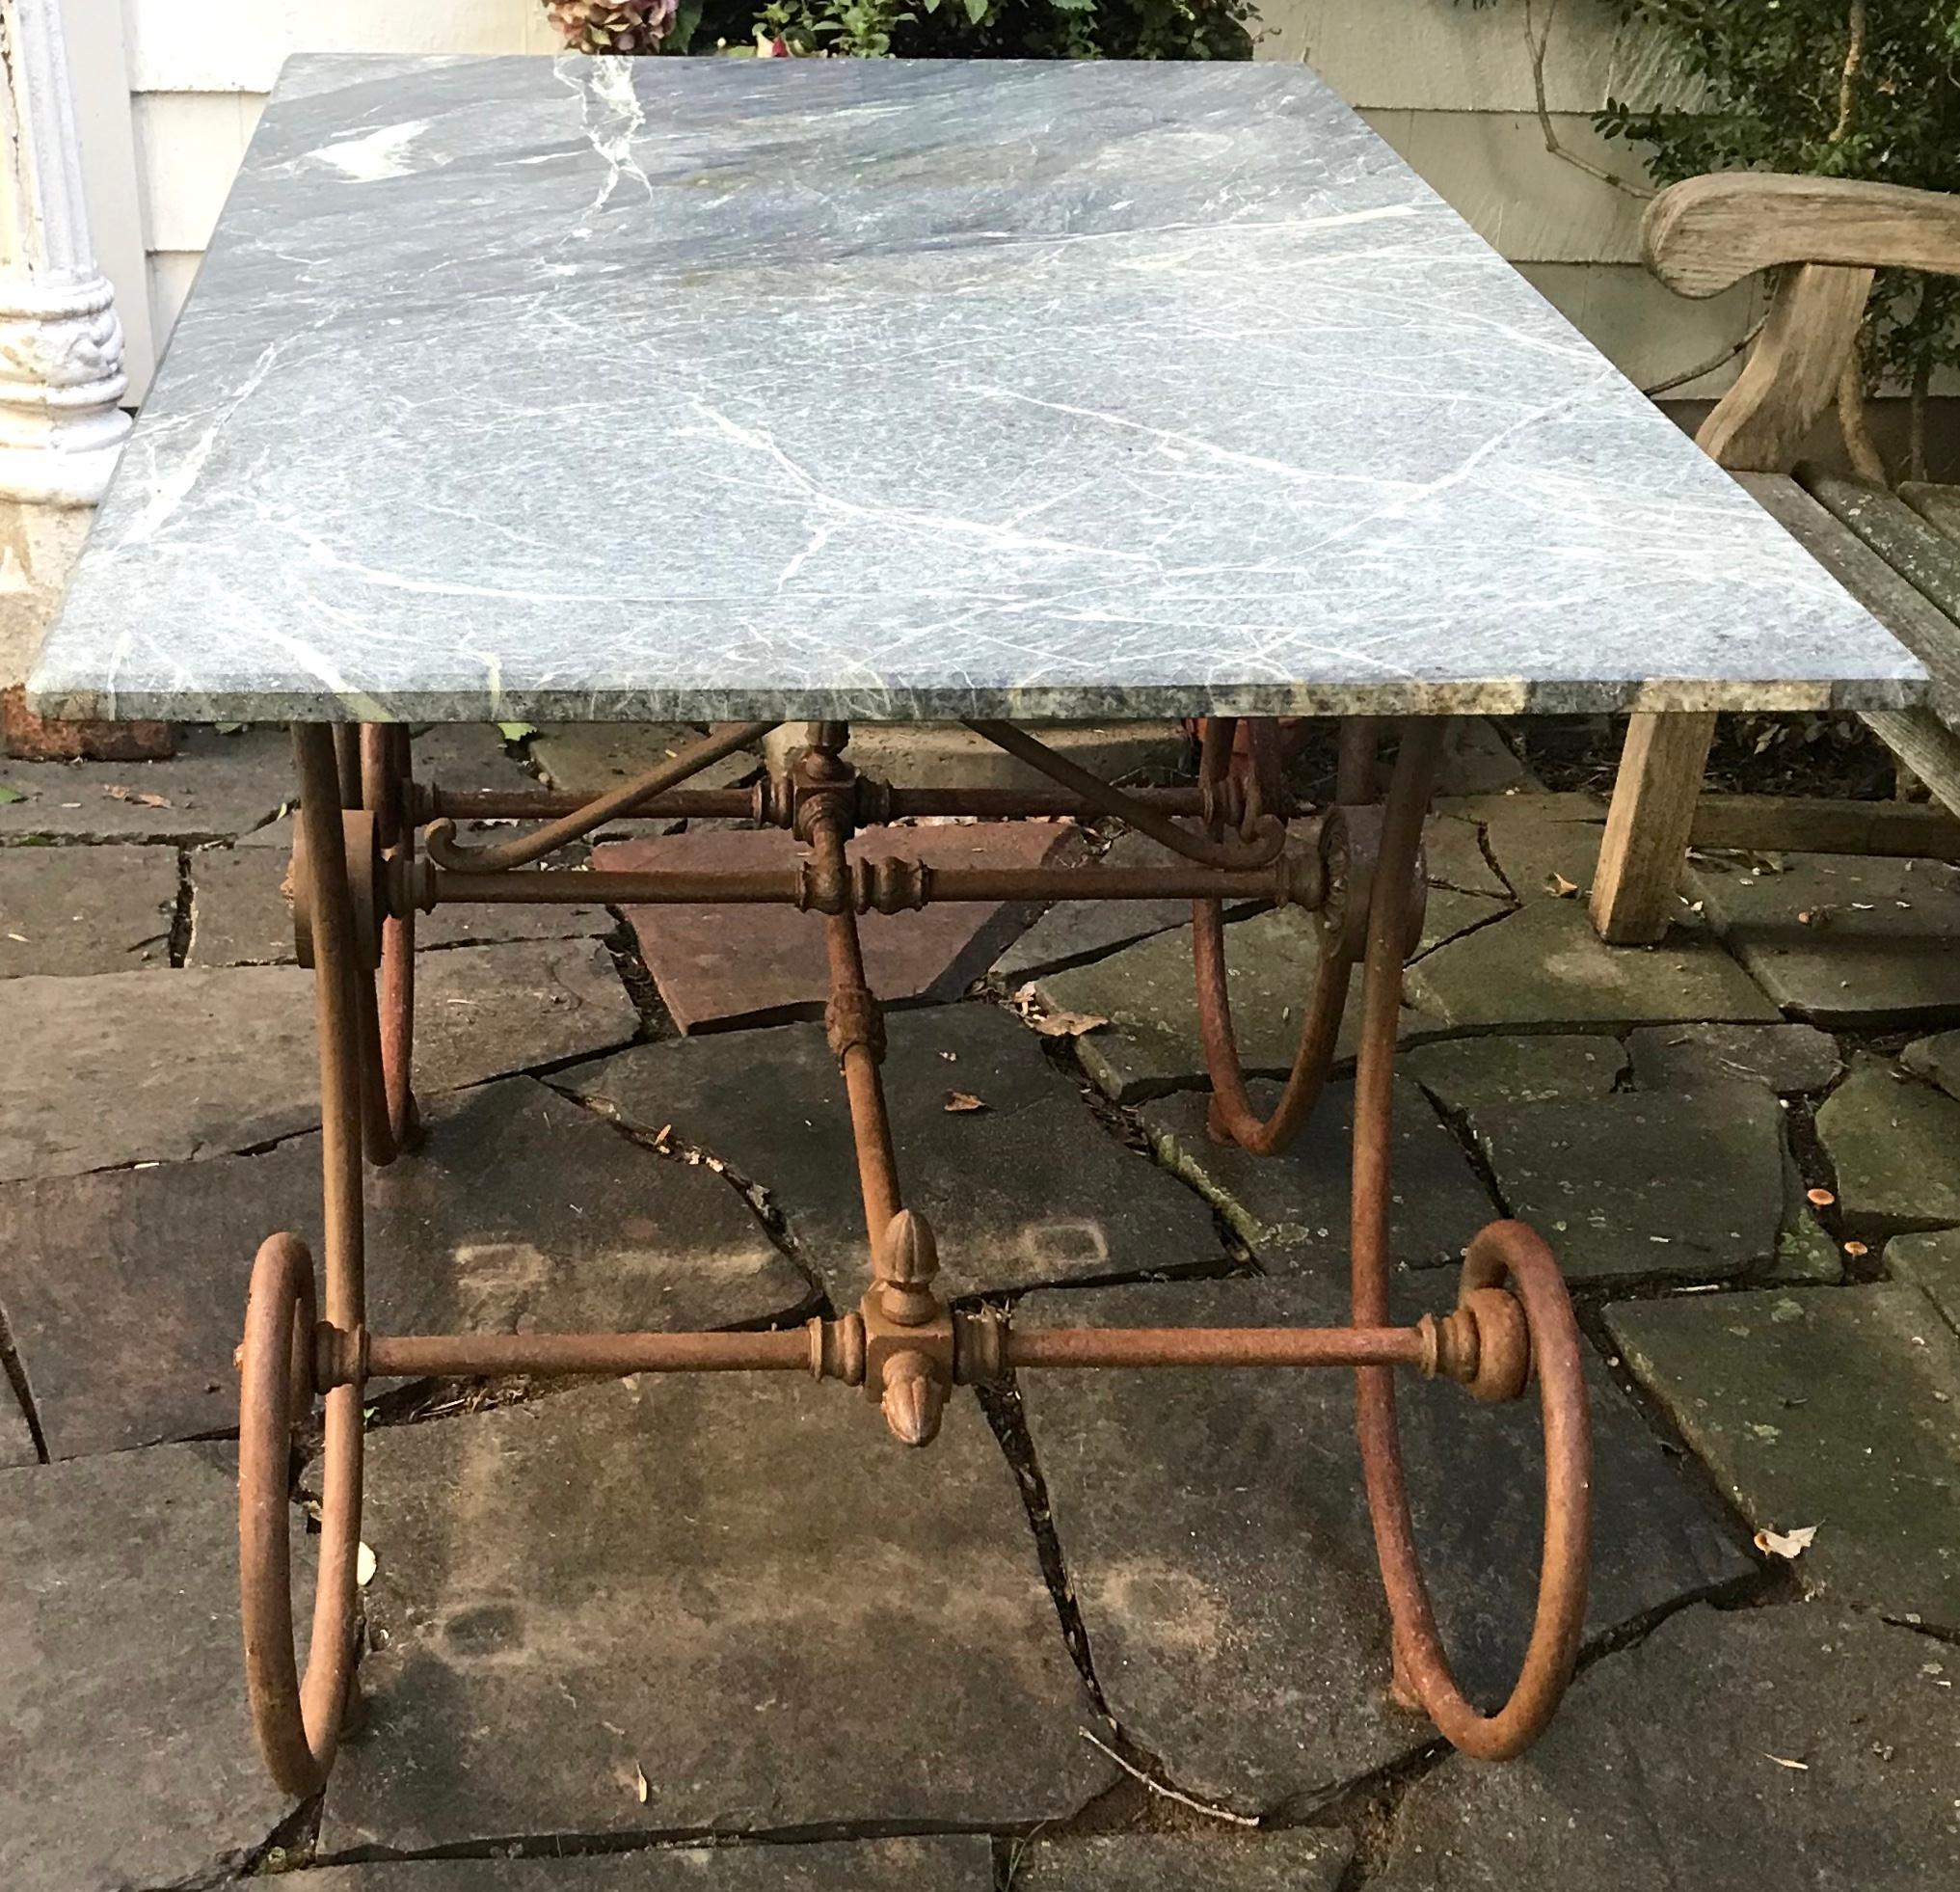 French green marble top baker's table. 19th century scrolling metal trestle form base with center medallions and acorn stretcher finials all supporting a rich green slab of French marble. Wear commensurate with use; base has a uniform distress